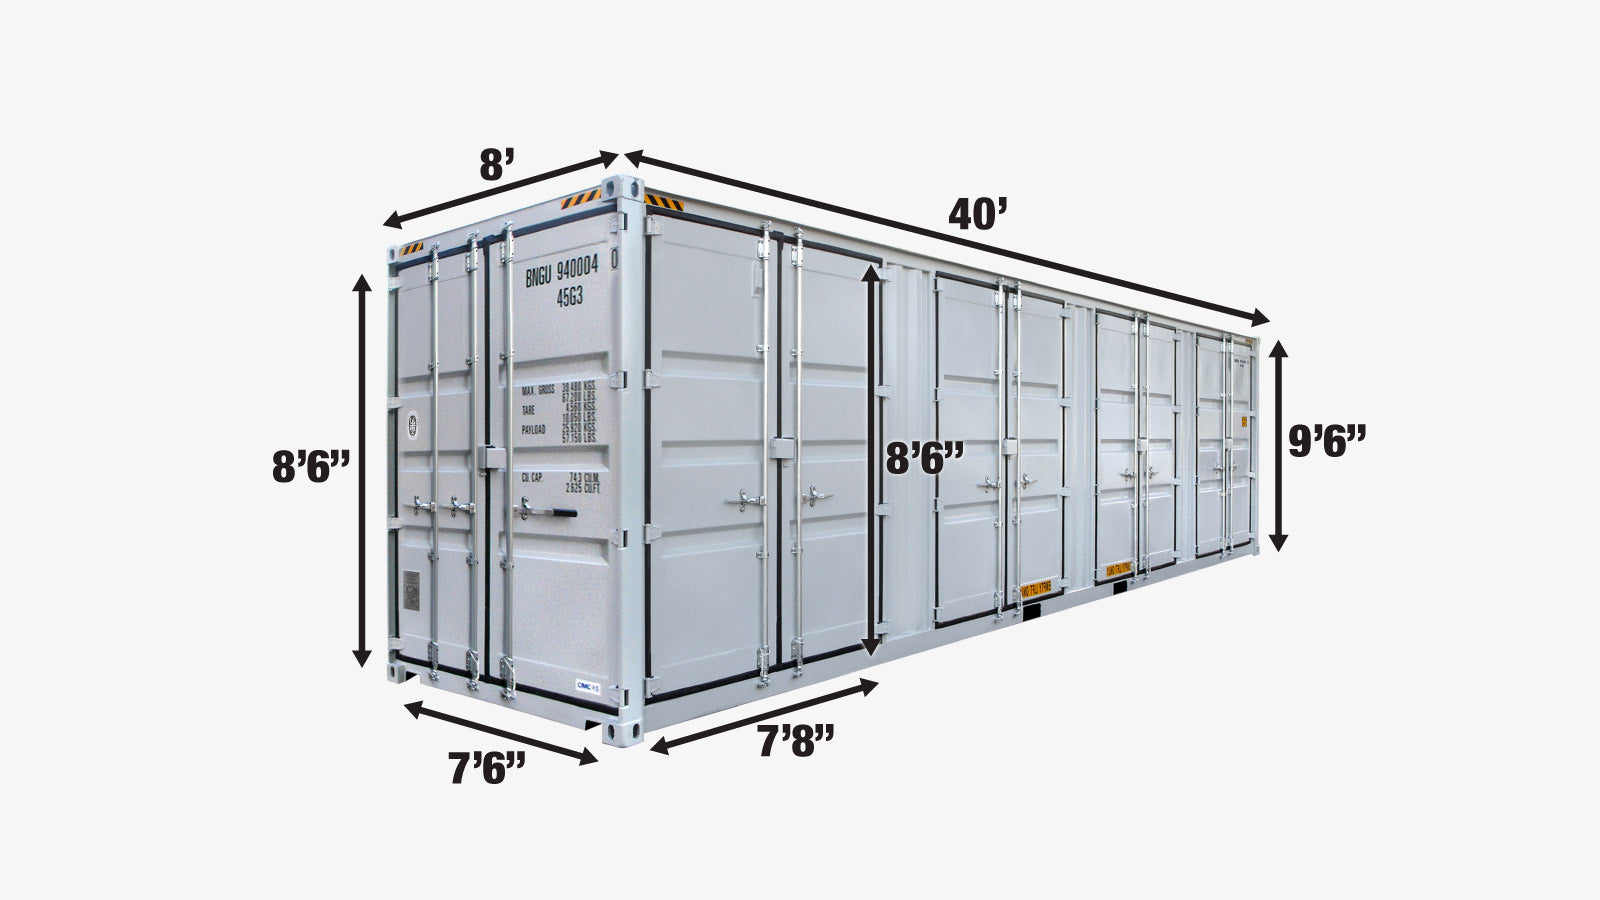 TMG Industrial 40' High Cube Side-Open Shipping Container, One Way Use, Security Lock Boxes, Ocean Sea Can Standards, TMG-SC40S-specifications-image